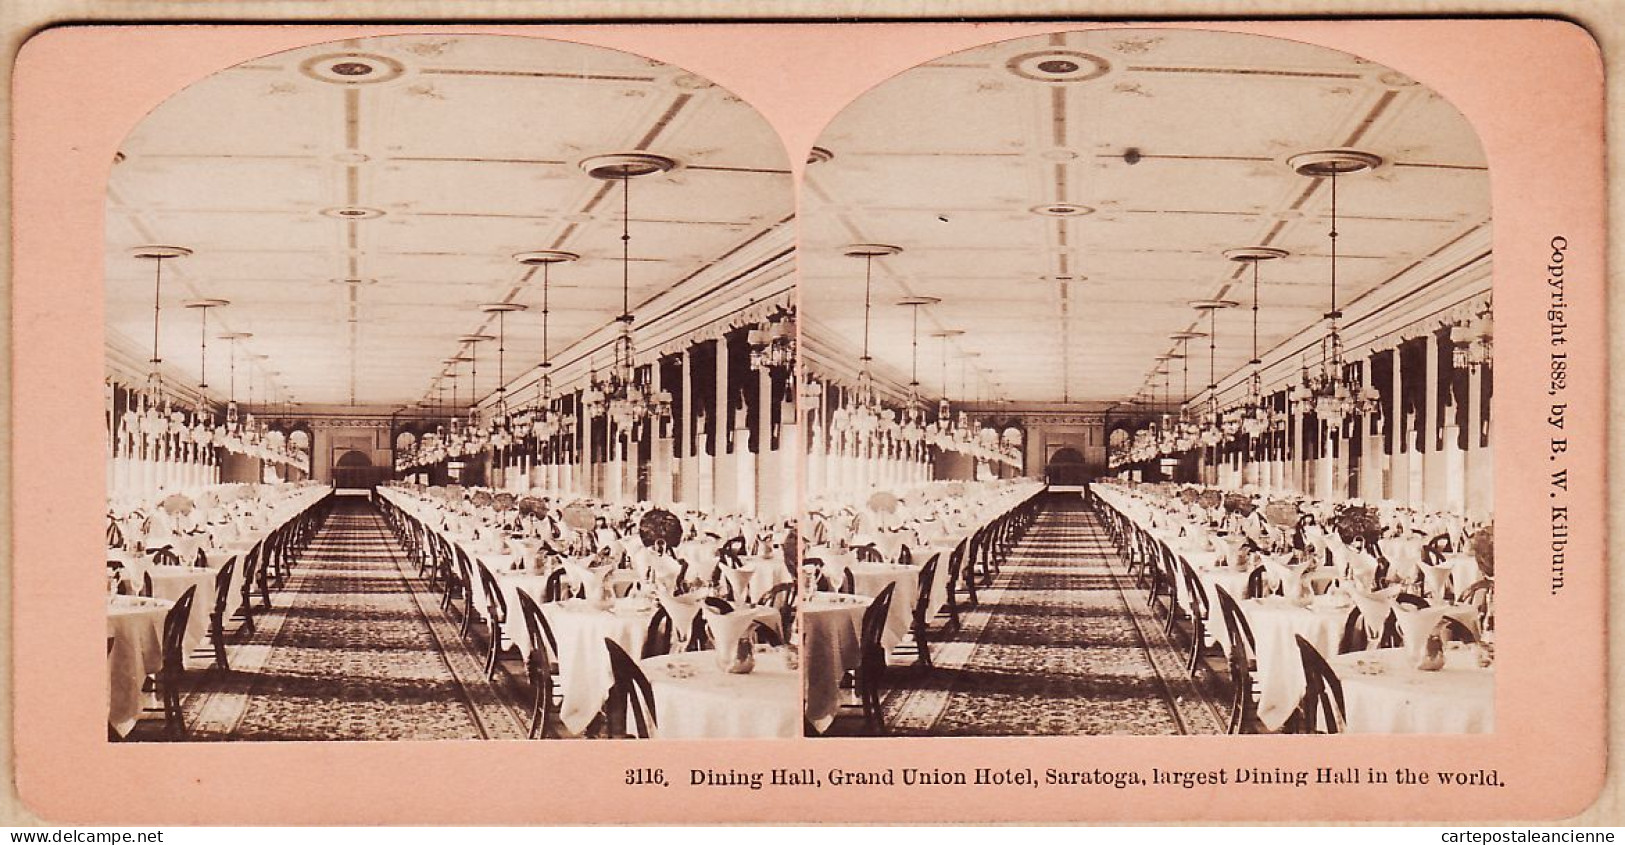 04585 / U.S.A KILBURN 1882 SARATOGA HOTEL GRAND UNION Dining Hall Largest Dining Hall In The World Photo Stereoview 3116 - Stereo-Photographie